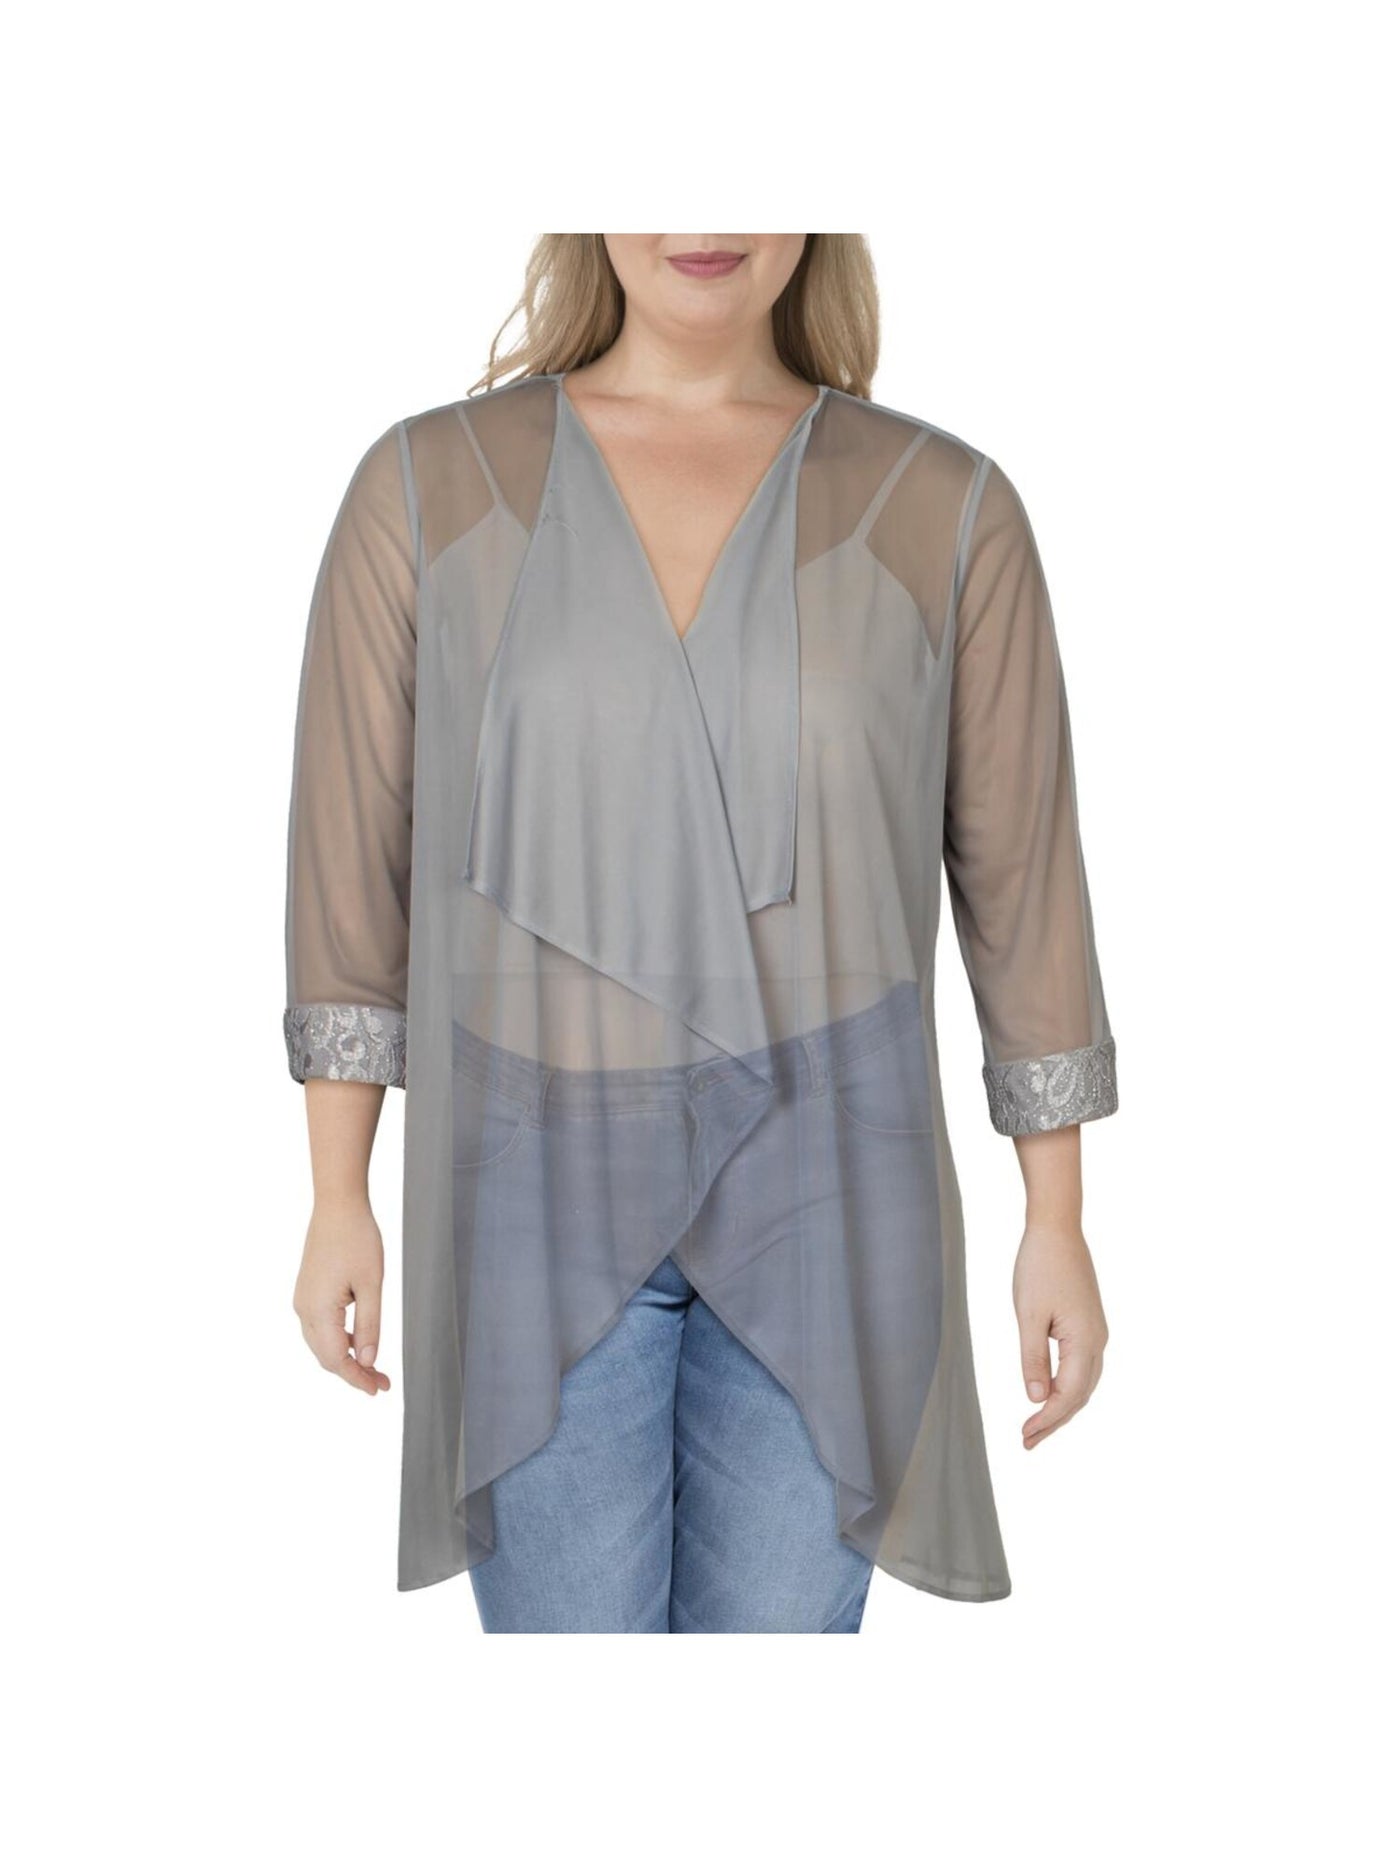 R&M RICHARDS Womens Gray Embellished Sheer Cuffed 3/4 Sleeve Open Front Wear To Work Top 8